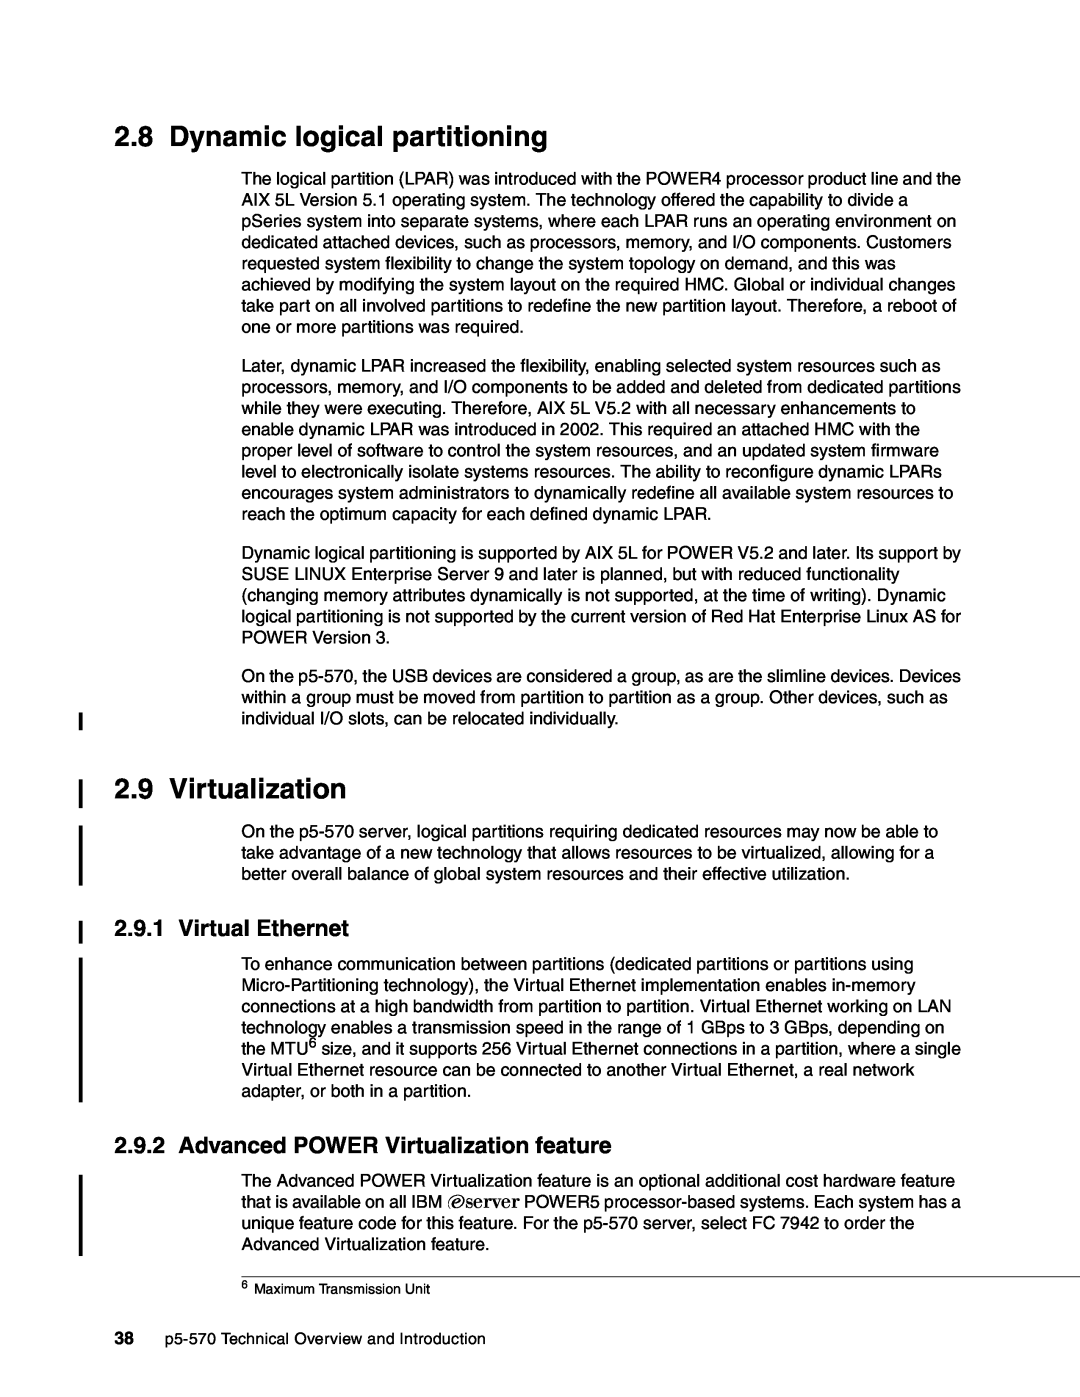 IBM P5 570 manual Dynamic logical partitioning, Virtual Ethernet, Advanced POWER Virtualization feature 